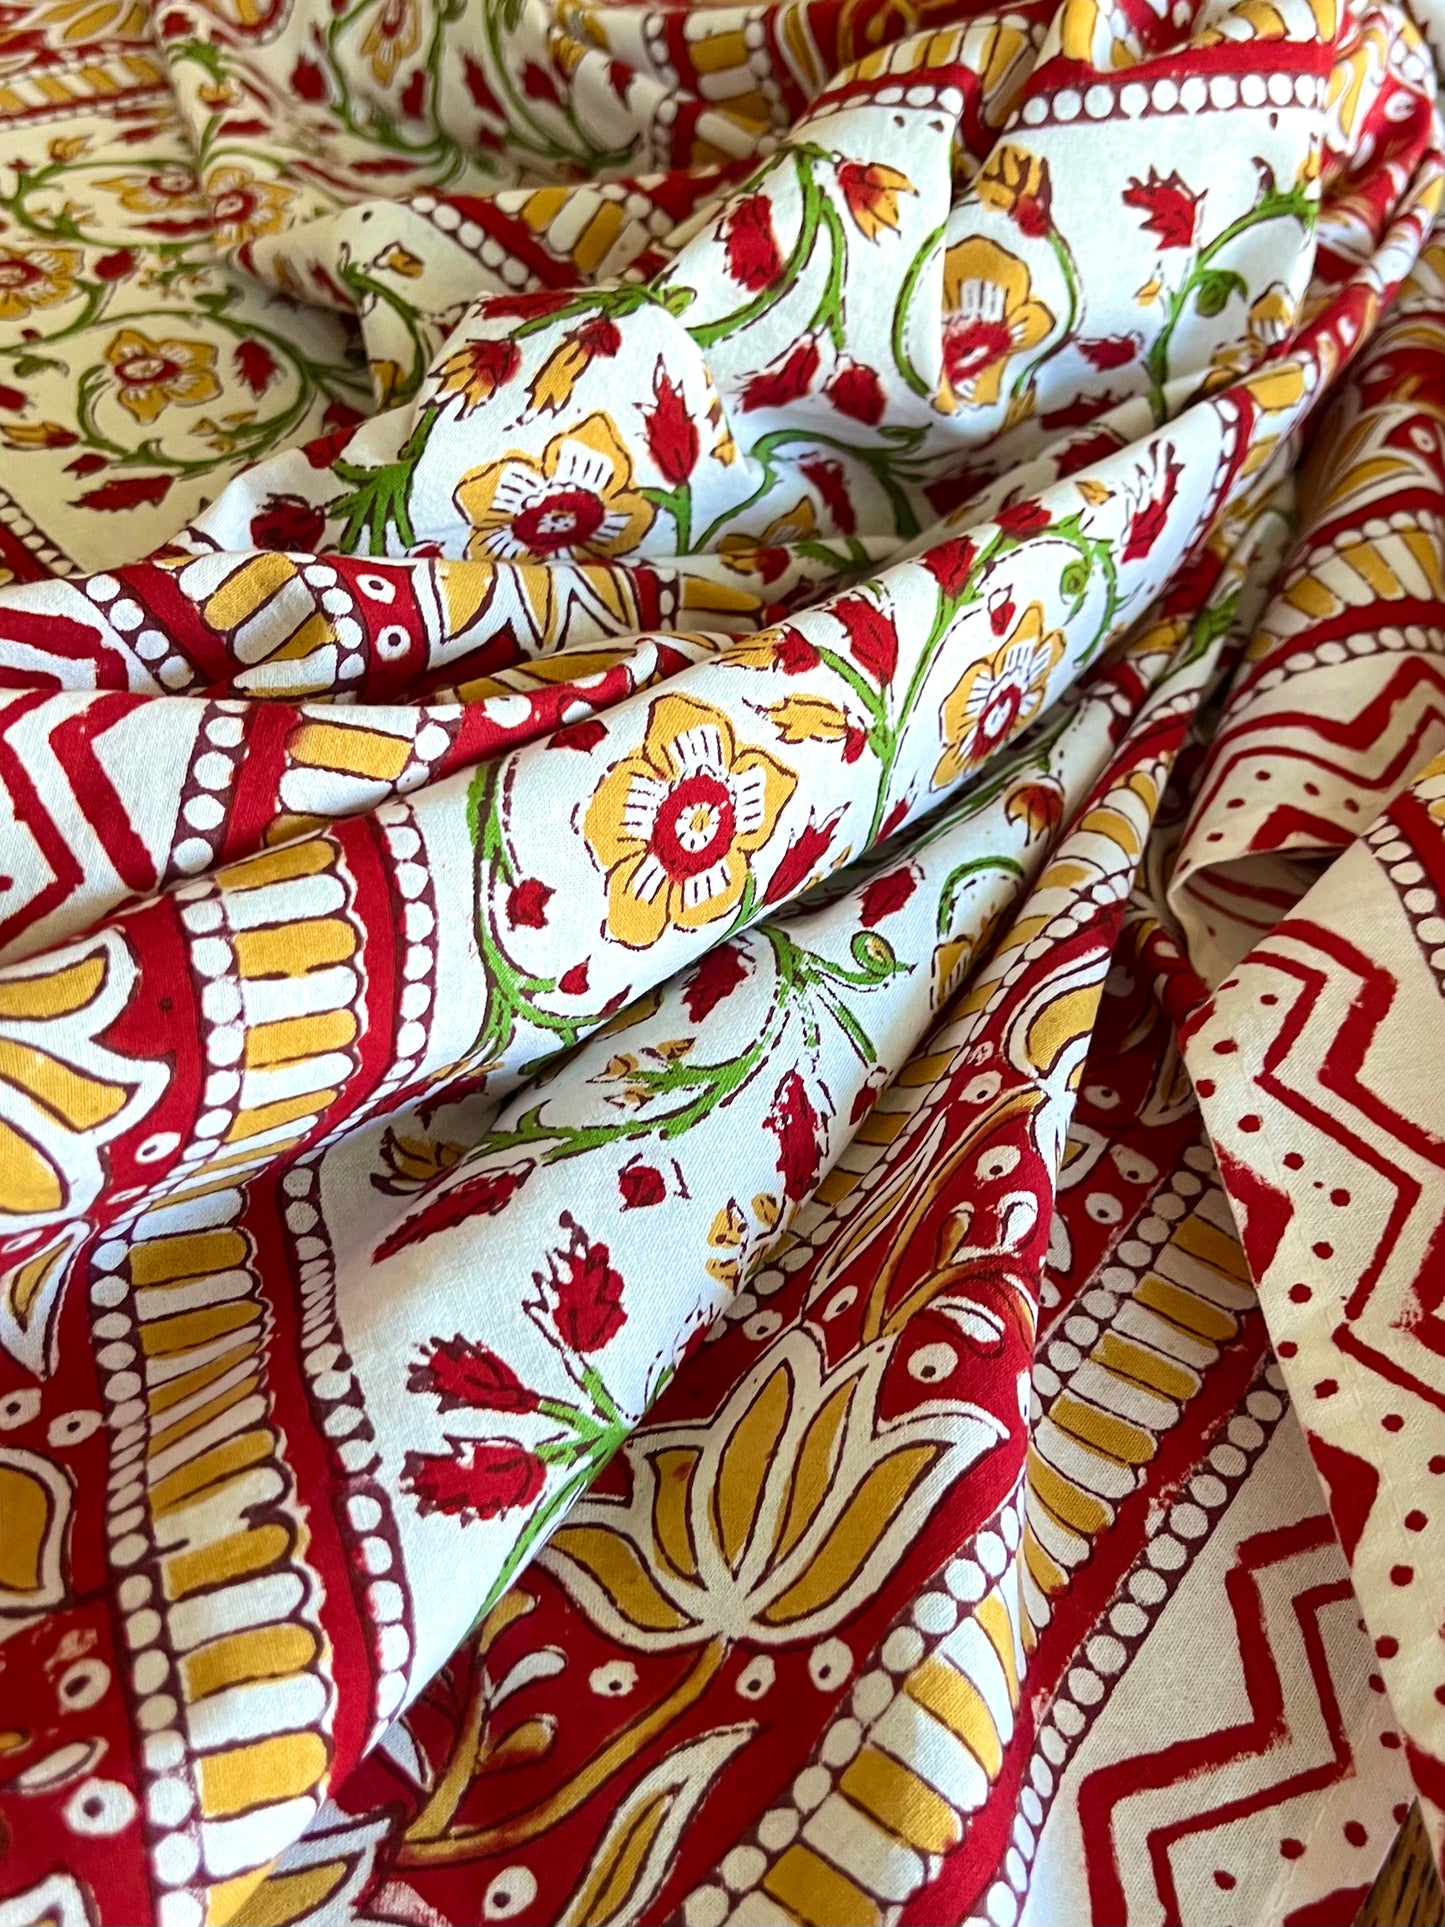 Hand Block Printed Indian Cotton Tablecloth - Winter Tudor (Reds & Greens)